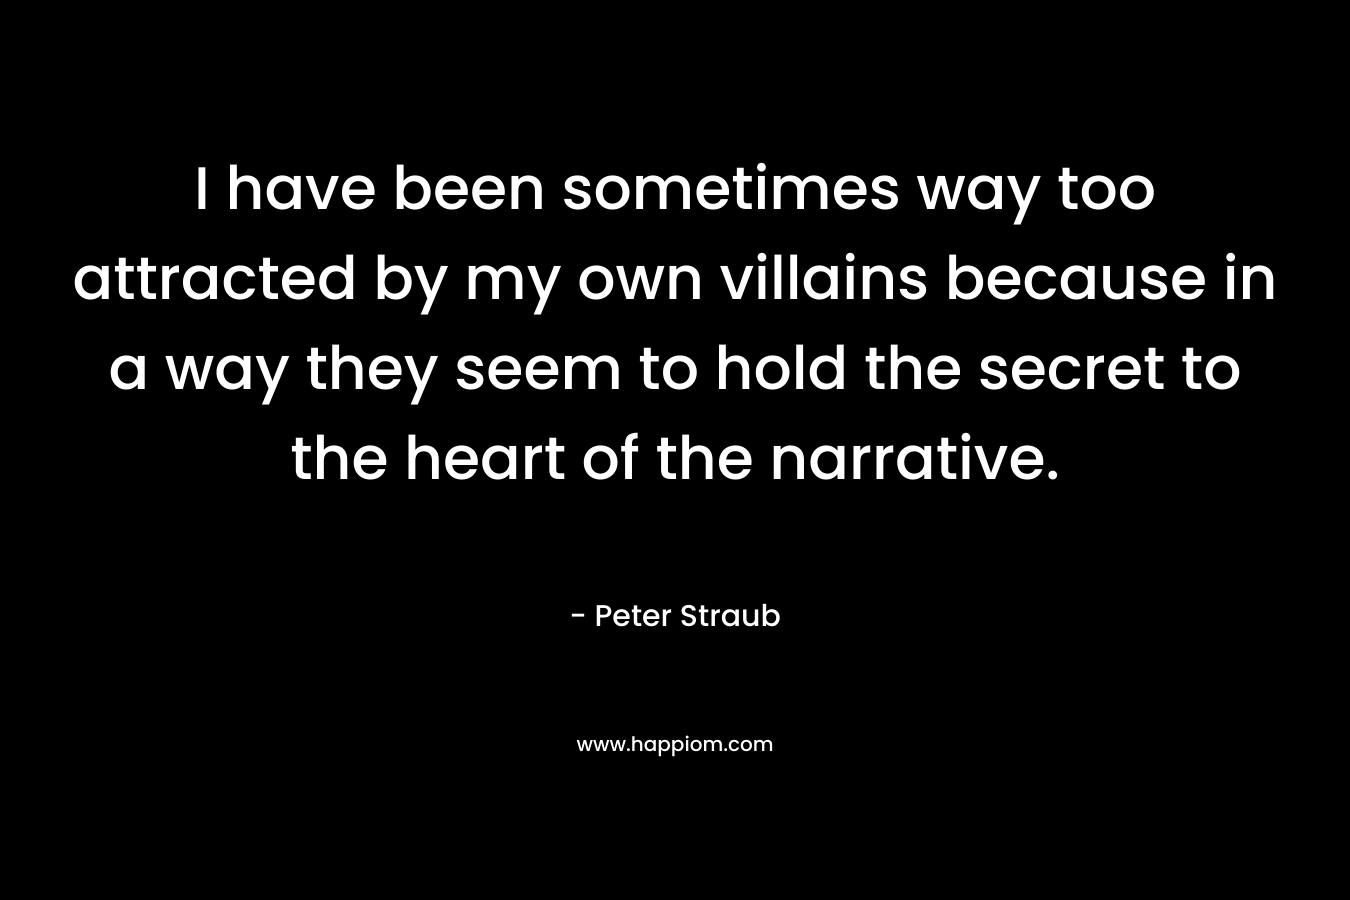 I have been sometimes way too attracted by my own villains because in a way they seem to hold the secret to the heart of the narrative. – Peter Straub